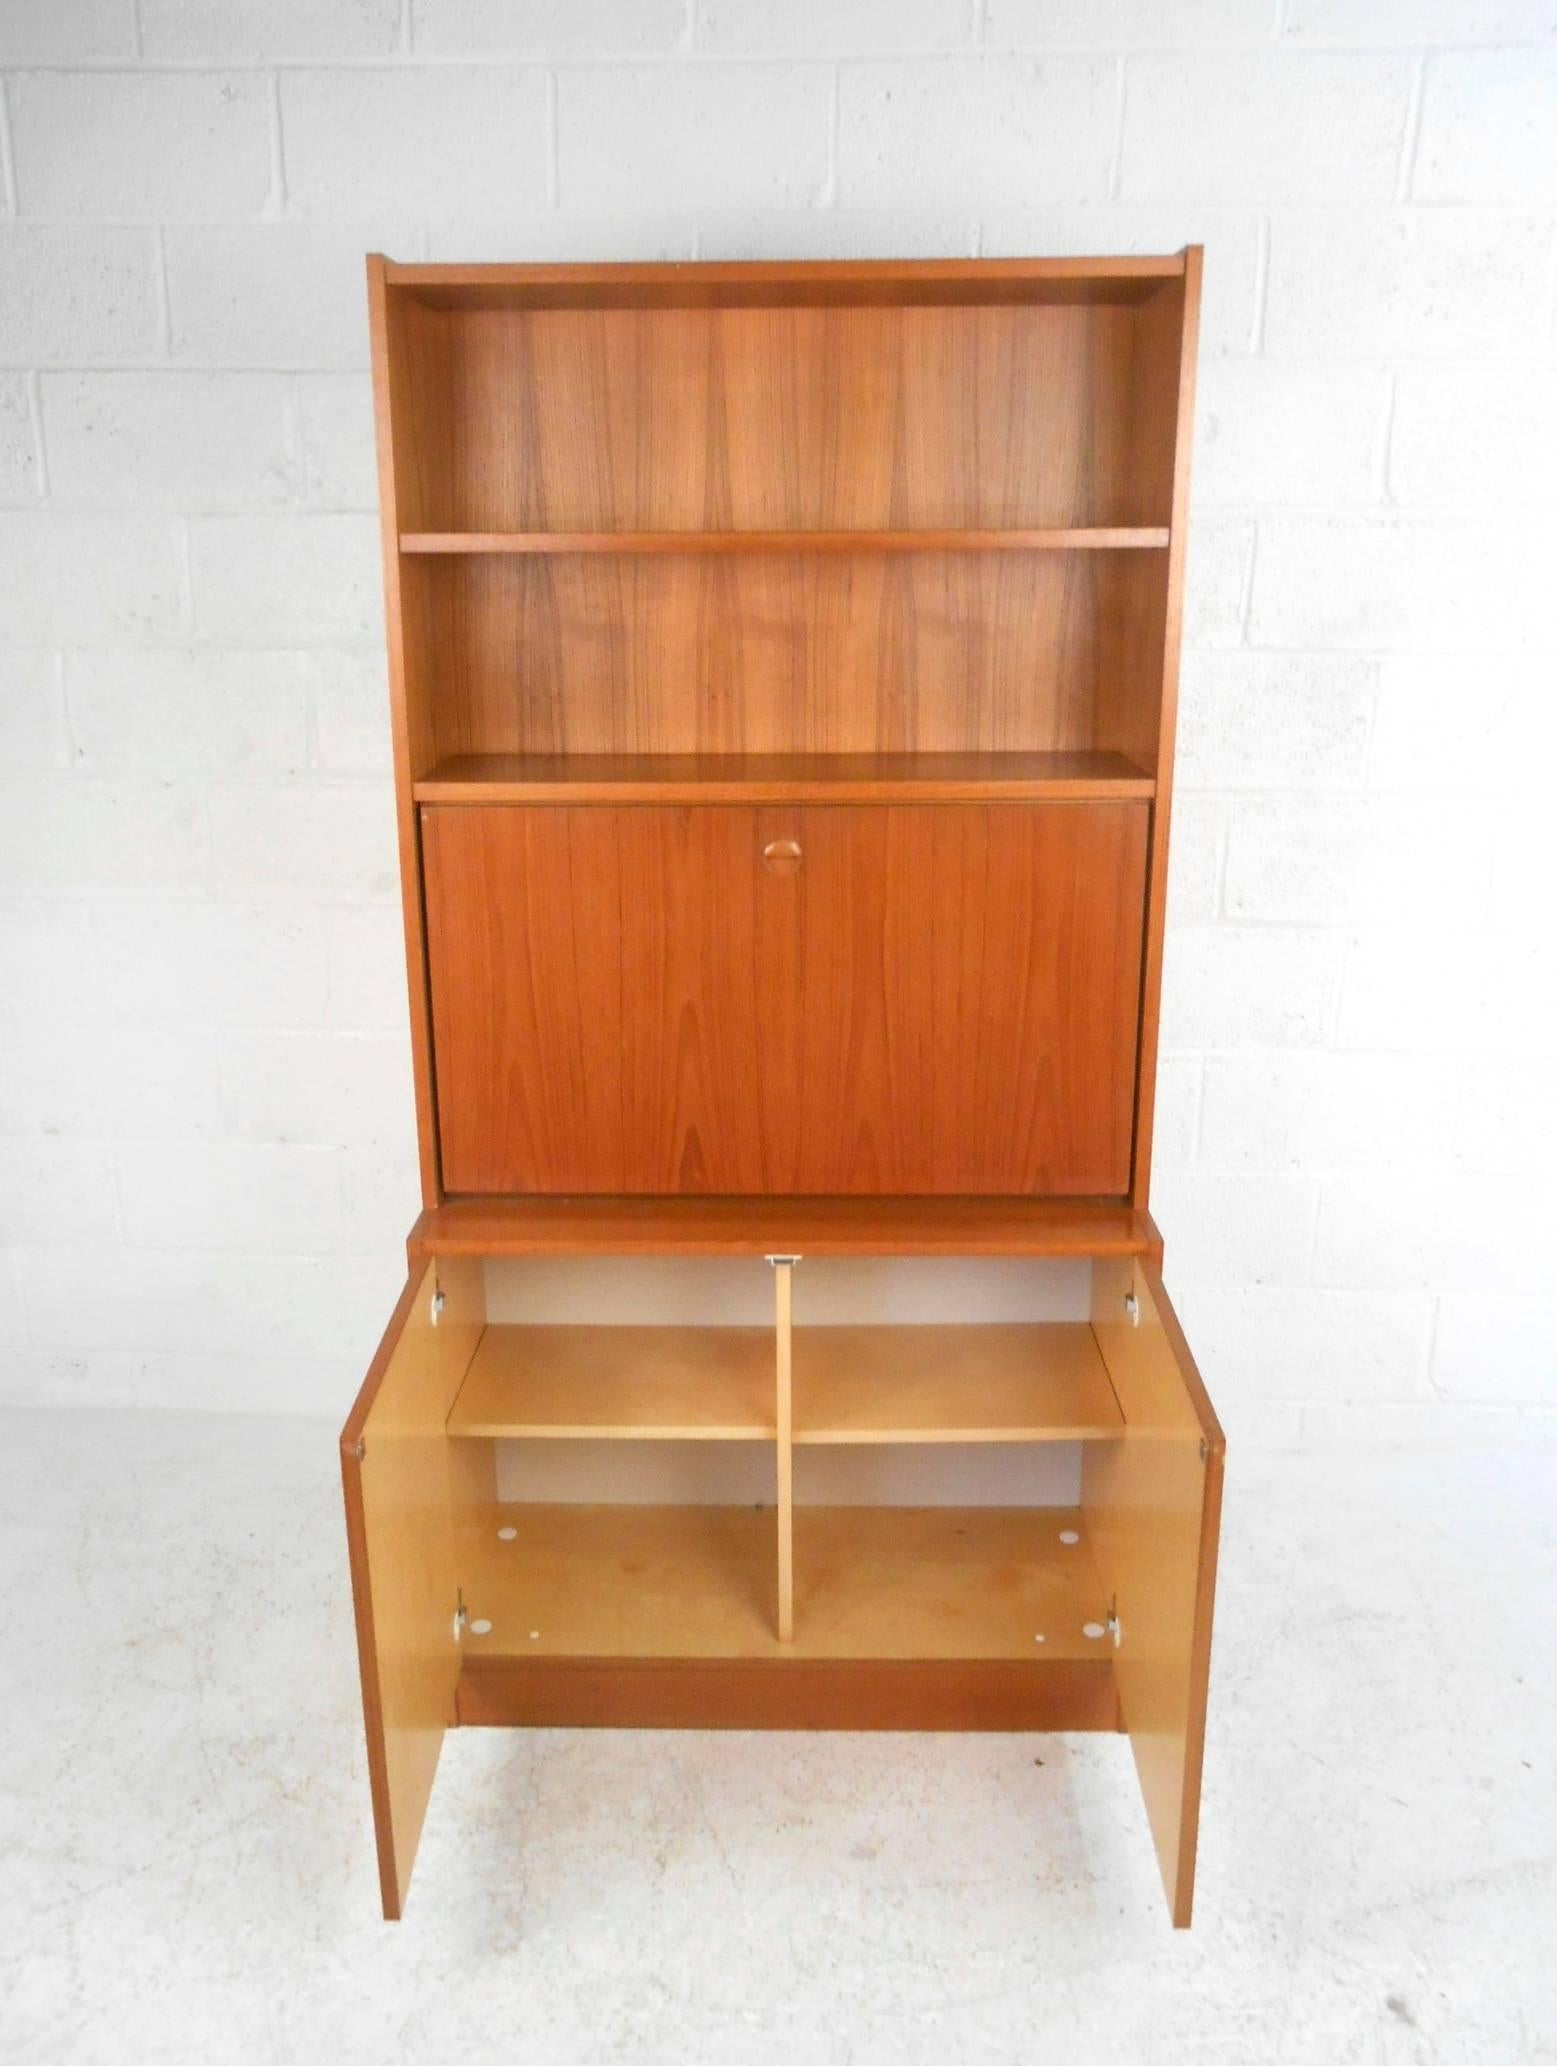 This beautiful vintage modern secretary features a drop front desk that hides a compartment with a white laminate interior. Versatile design functions as a work desk, display cabinet, or a book shelf. This wonderful case piece offers plenty of room